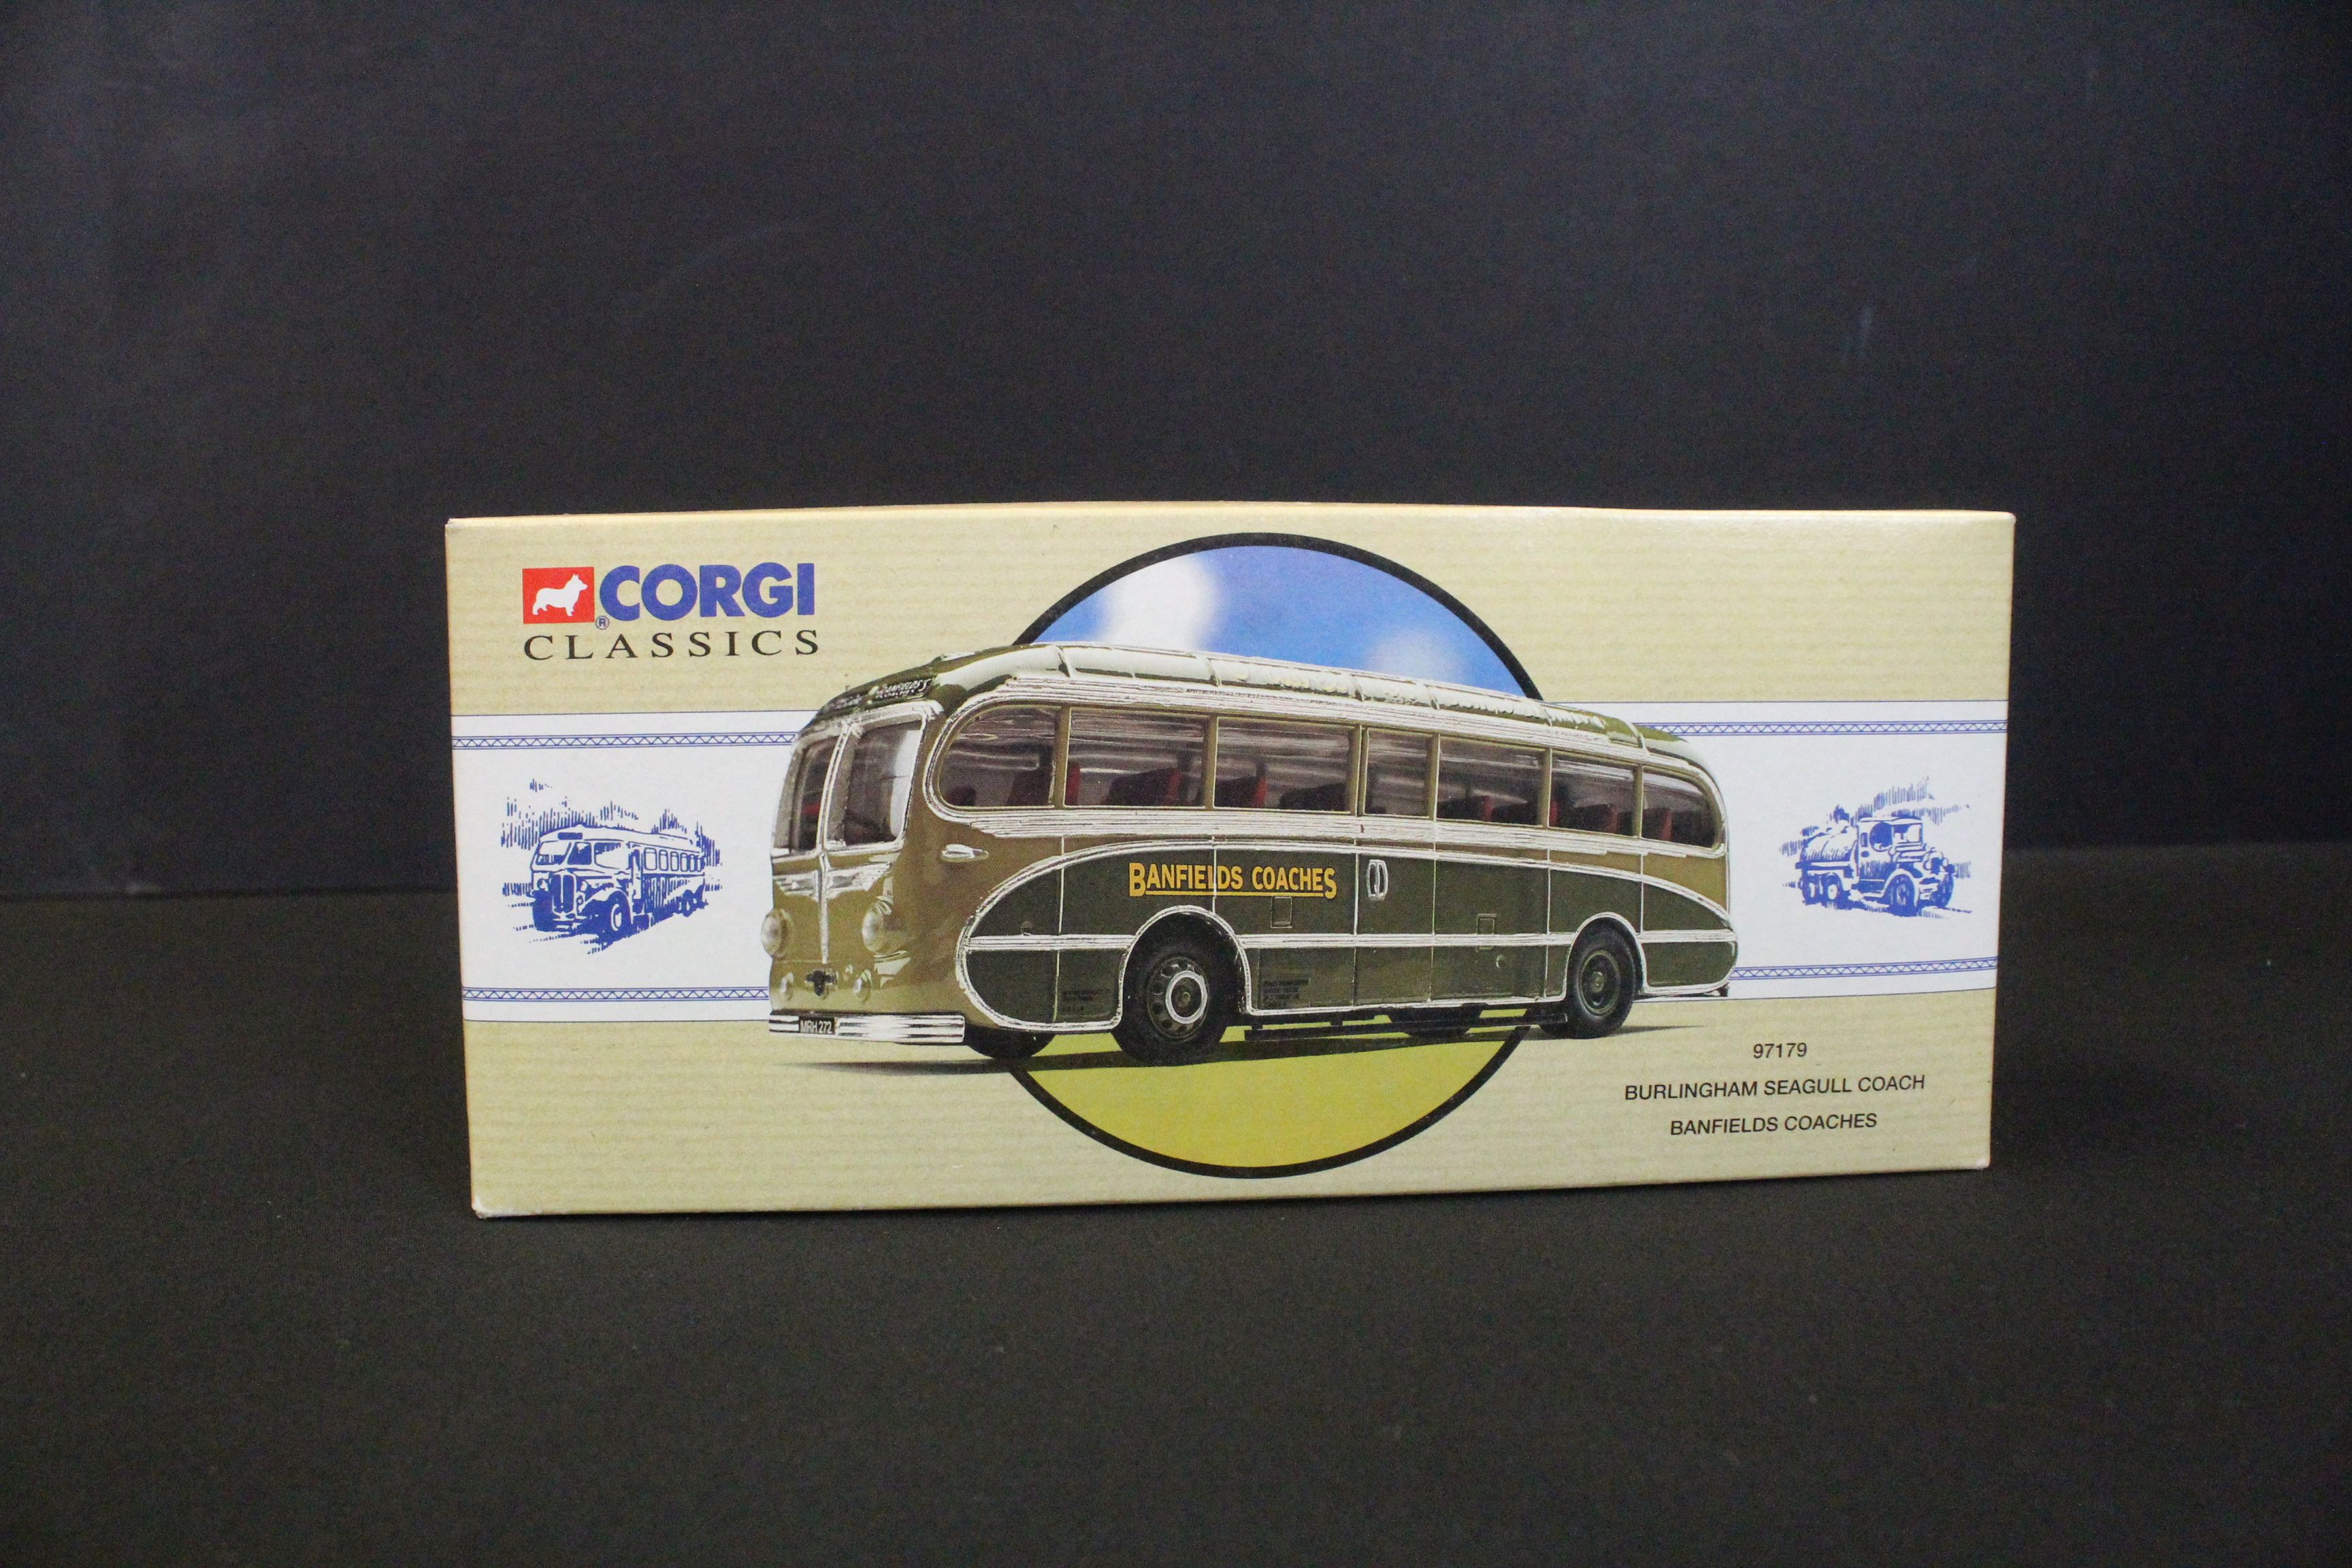 19 Boxed Corgi Public Transport from Corgi diecast models to include 2 x 97870 Karrier W4 - Image 6 of 7